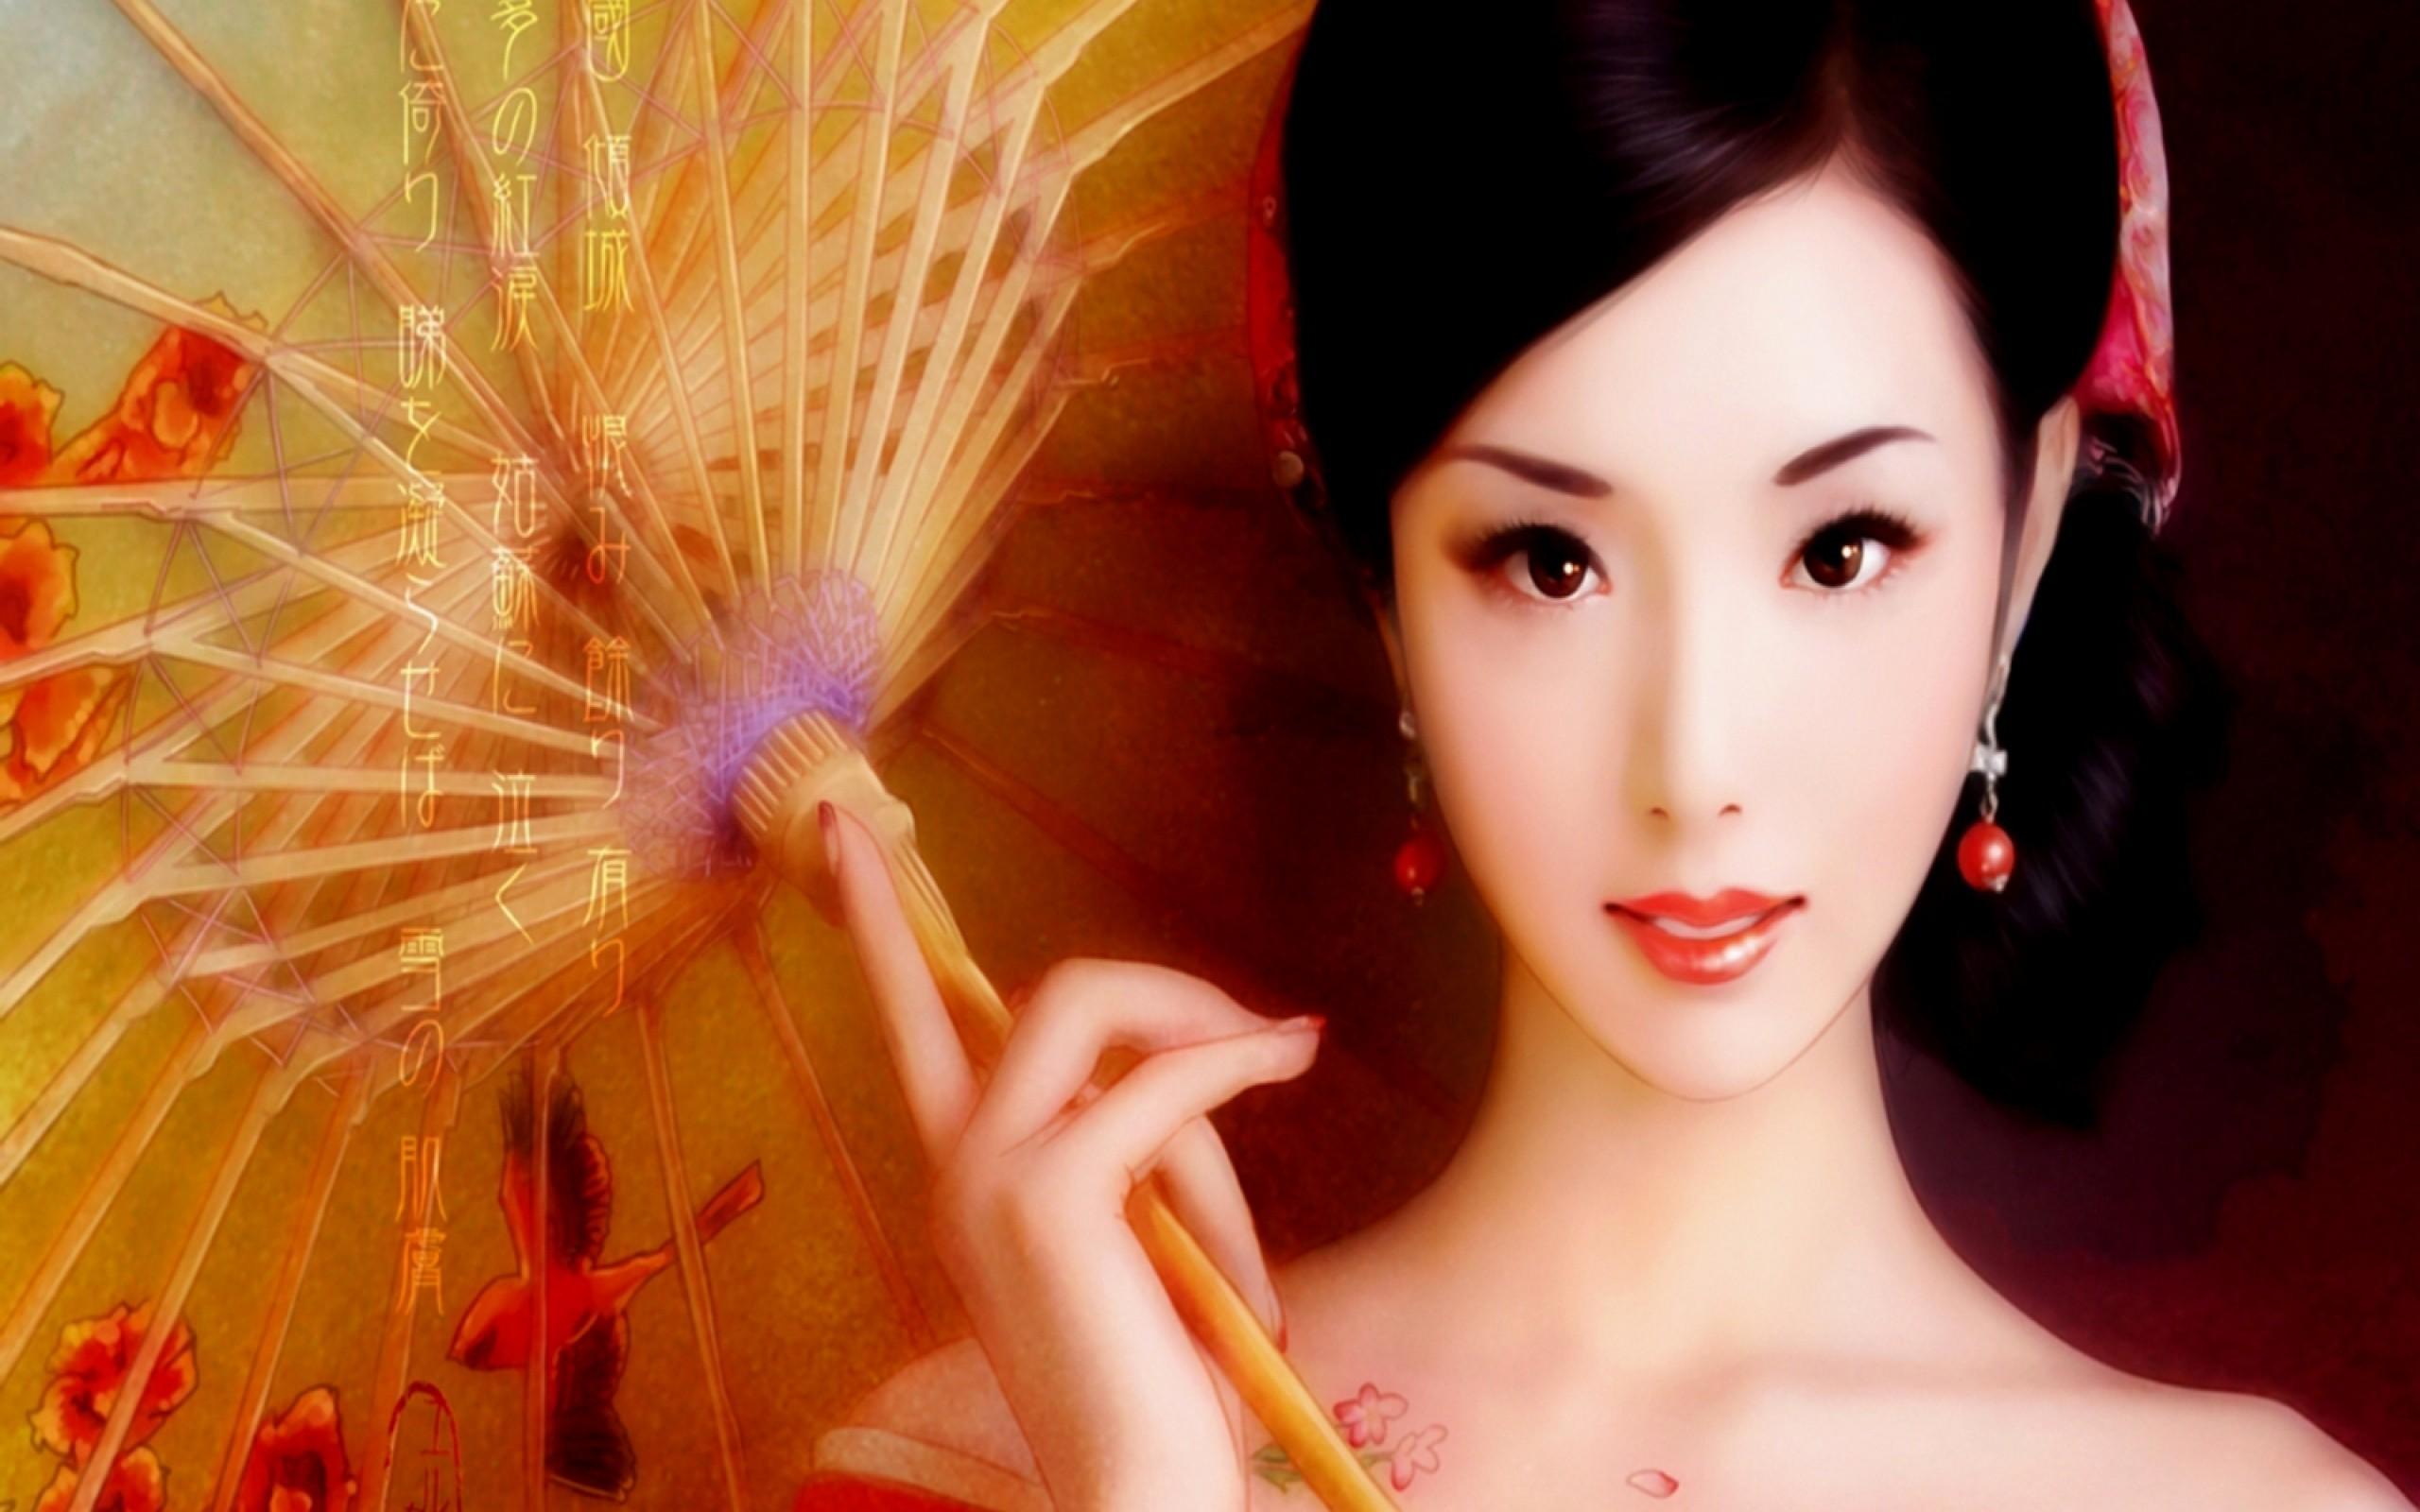 Portrait of Japanese girls wallpaper and image